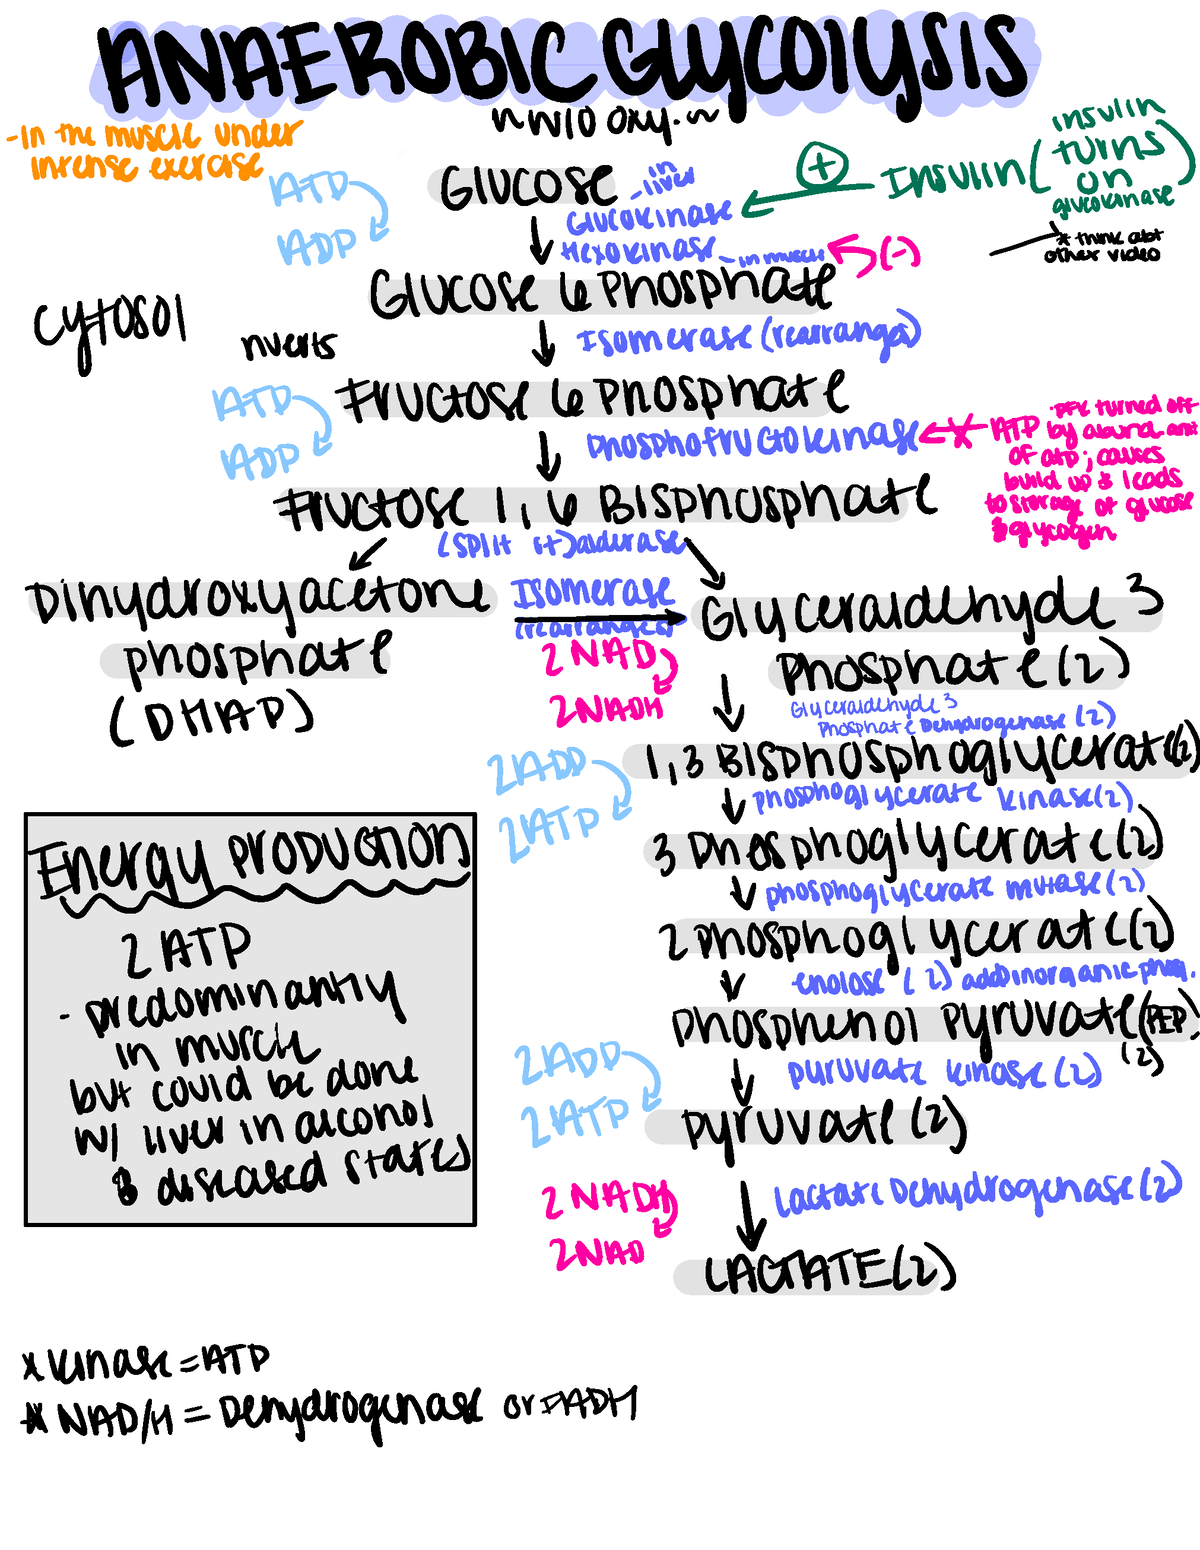 Glycolysis - video notes - ANAEROBICGlycolysis In the muscle under ...